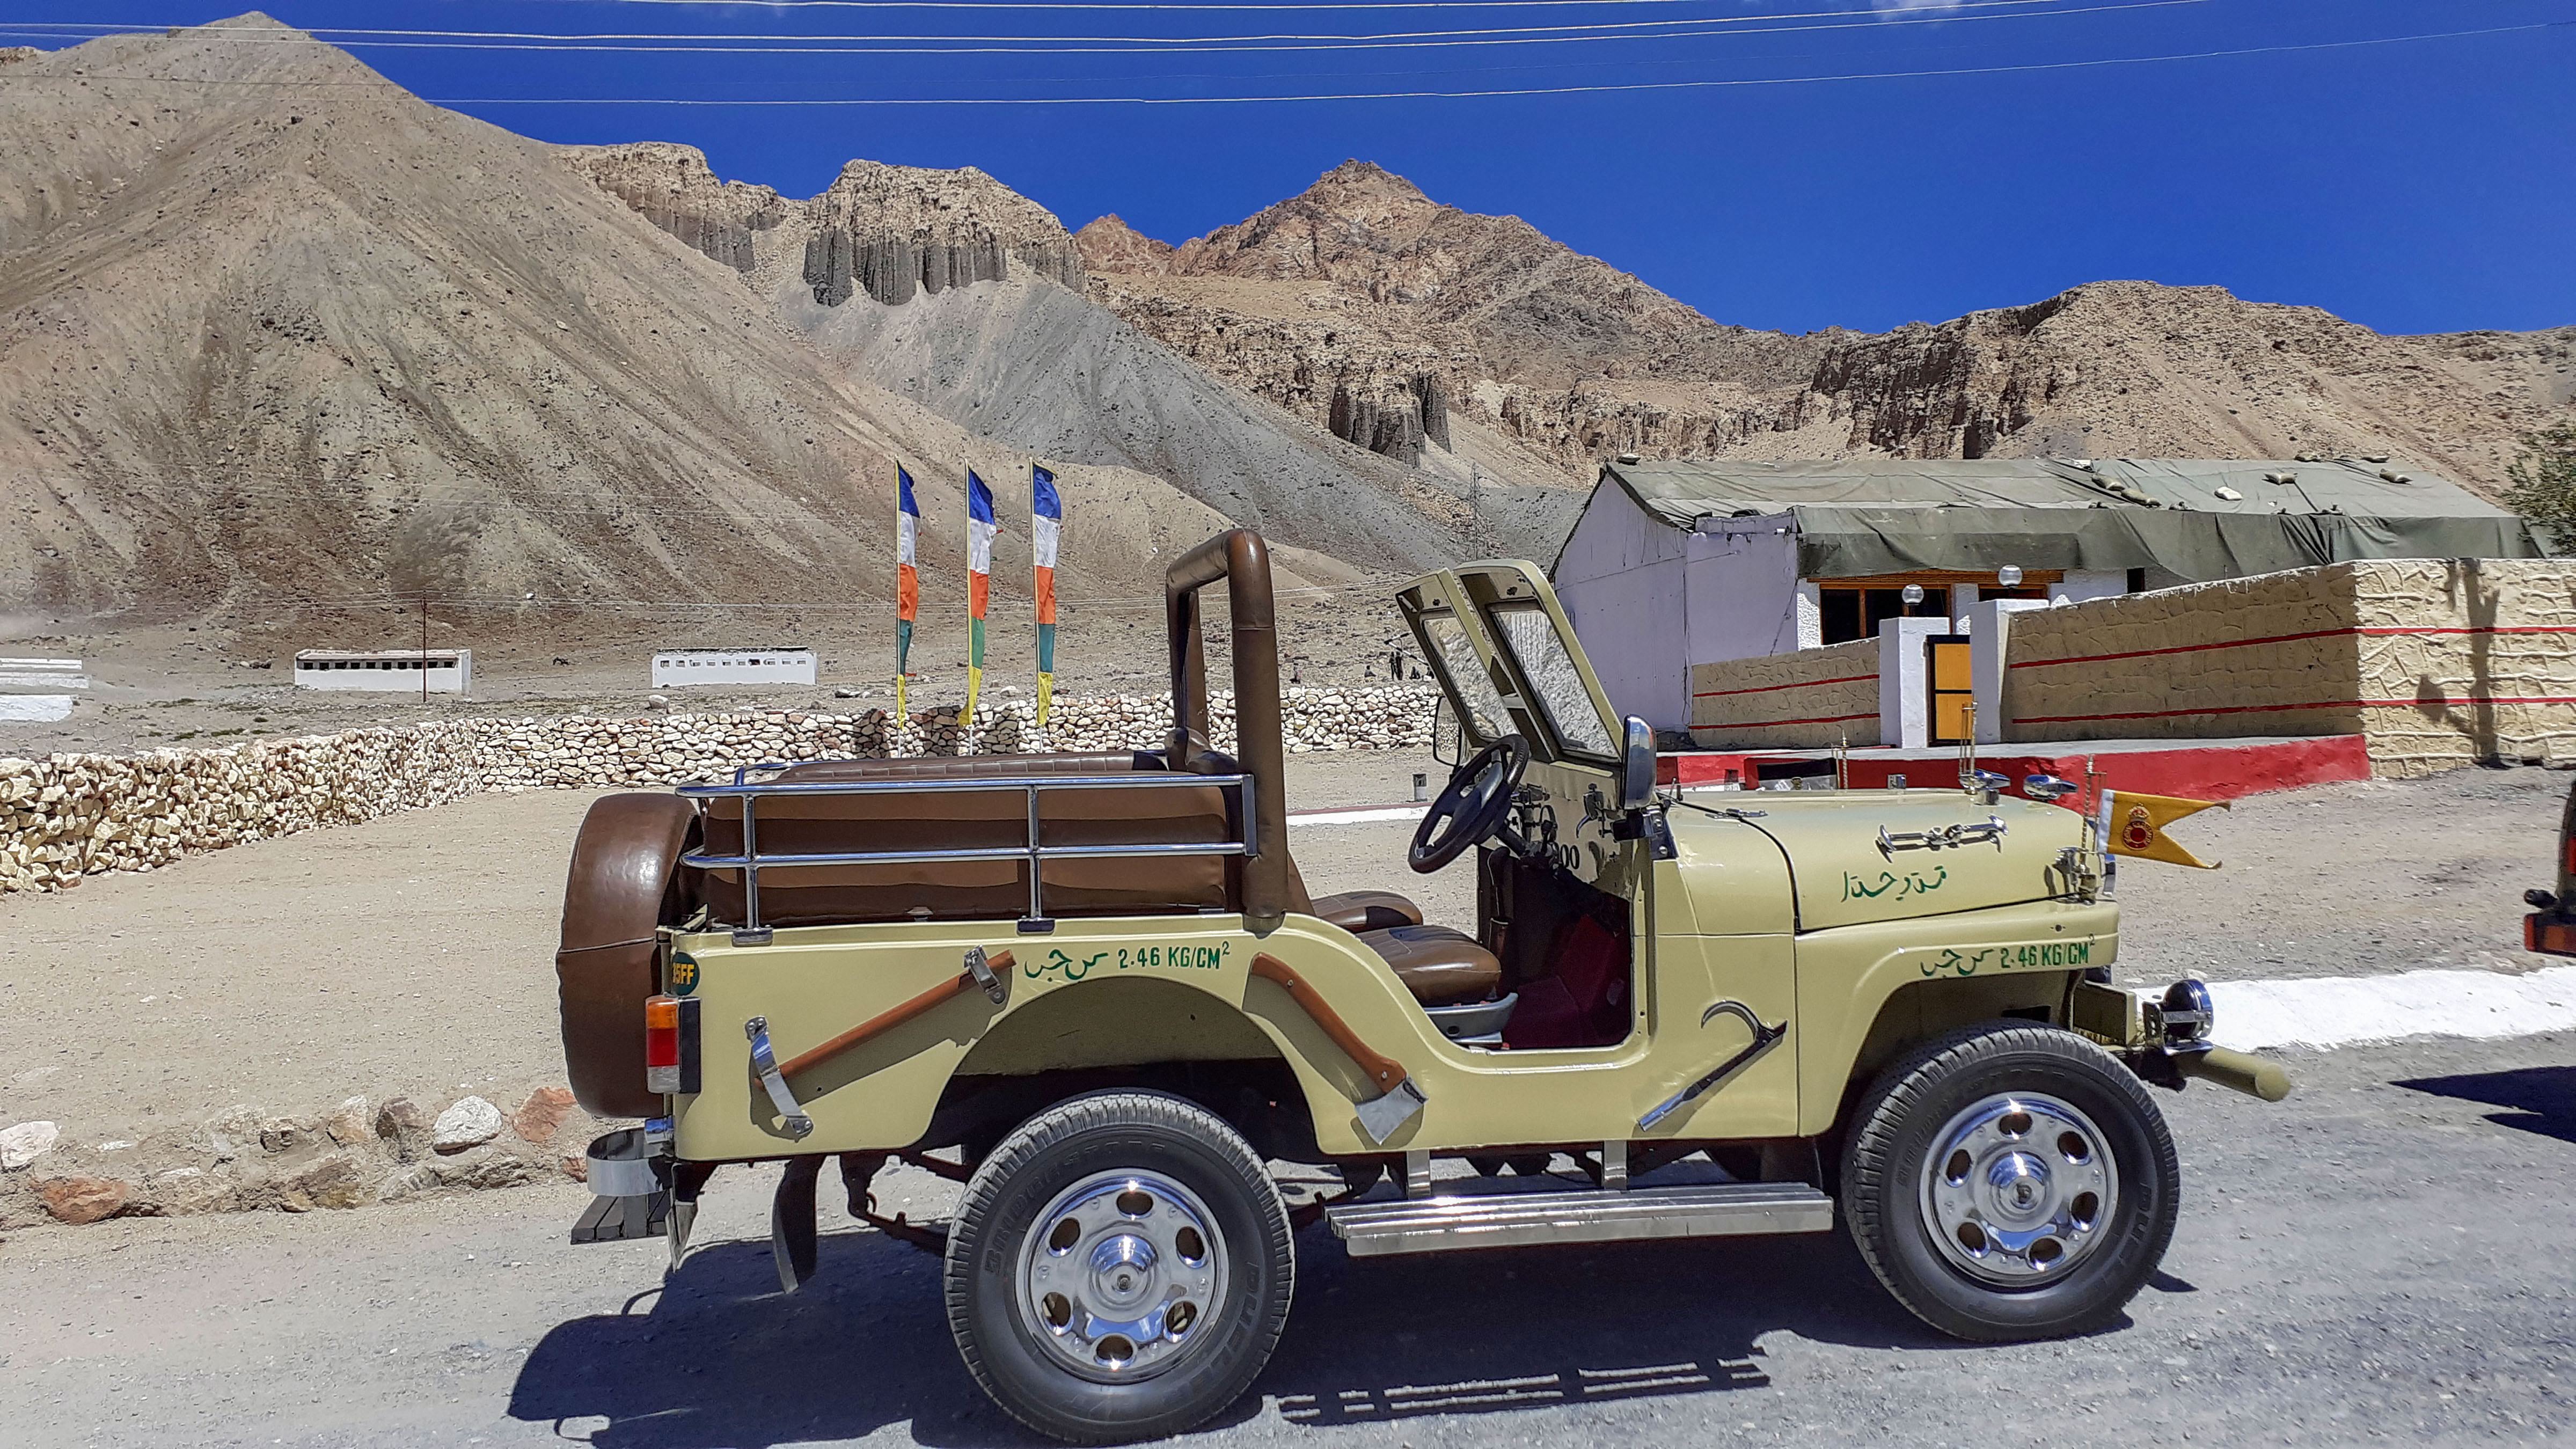 Jeep captured from Pakistan in 1971 stands as war trophy near Leh